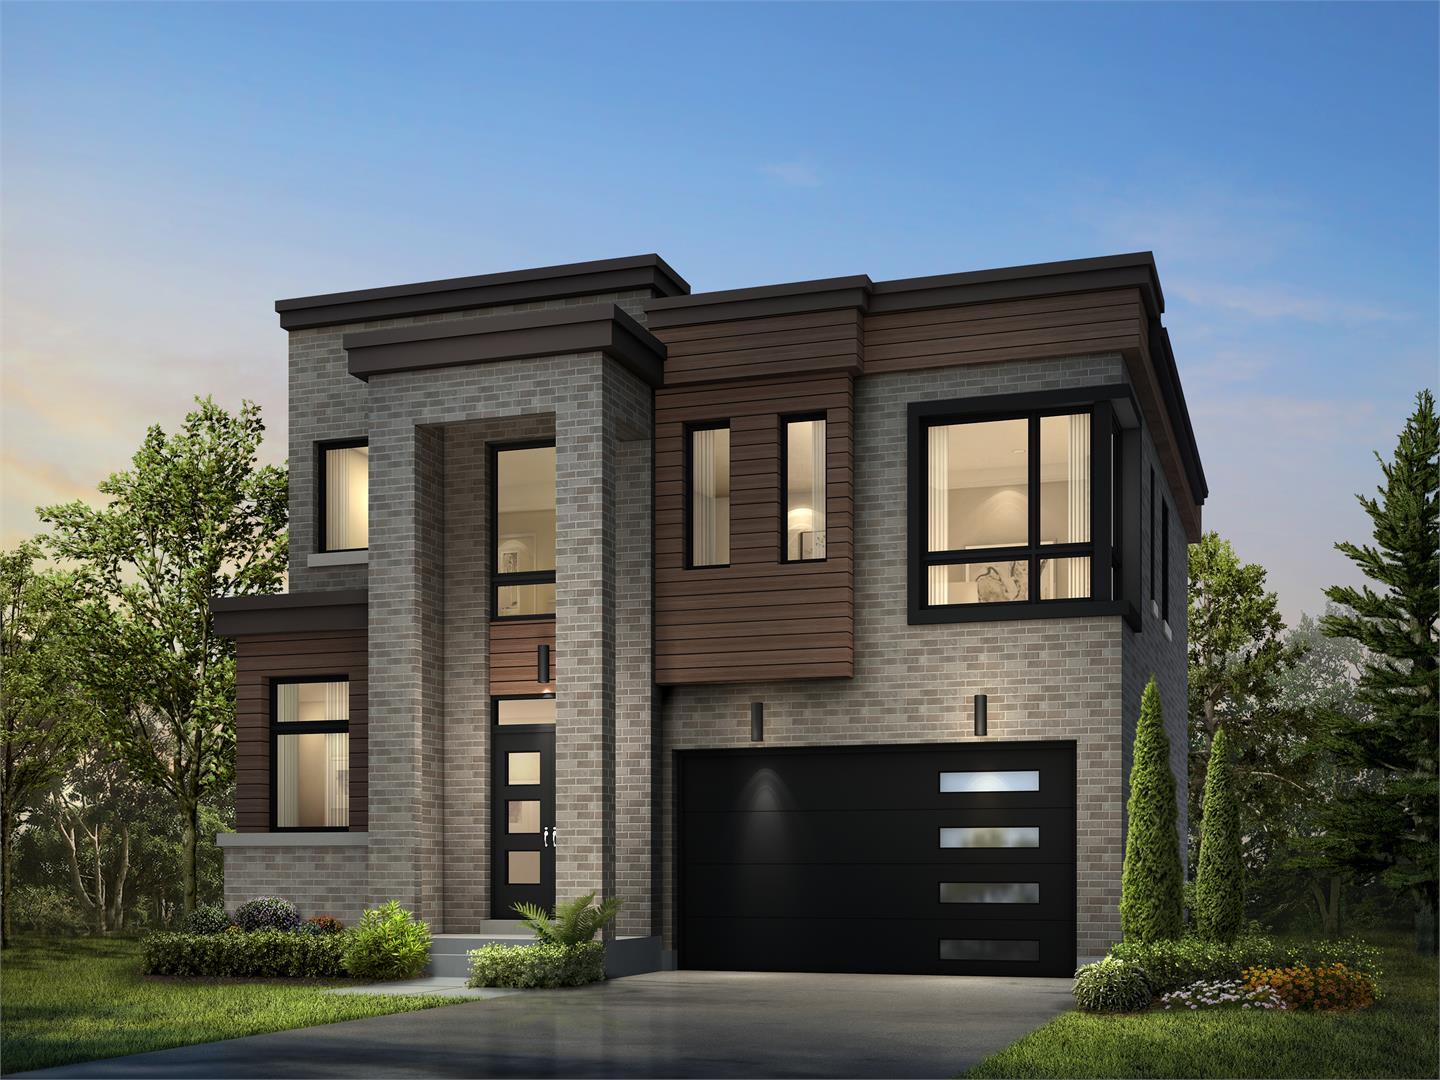 Exterior rendering of Frenchman's Bay detached home 2.